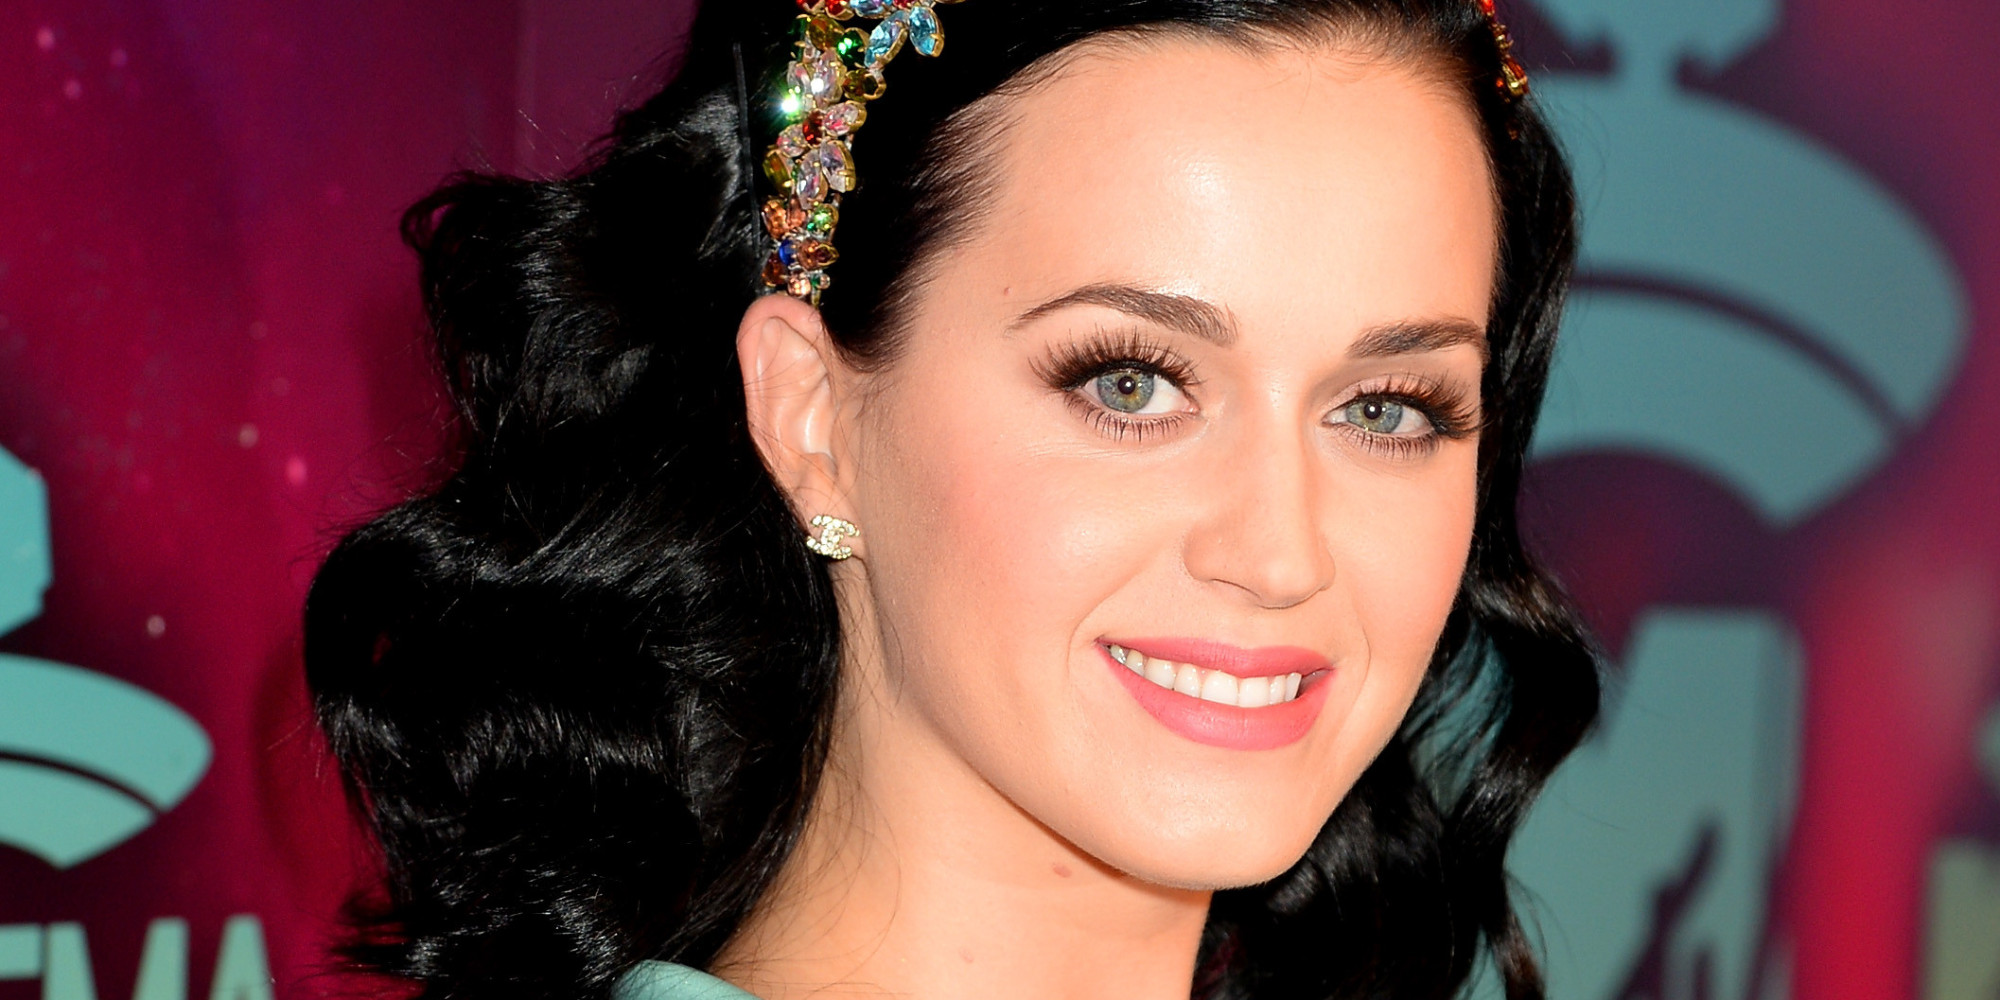 Katy Perry Sparks Engagement Rumors After Wearing Diamond Ring To The ...